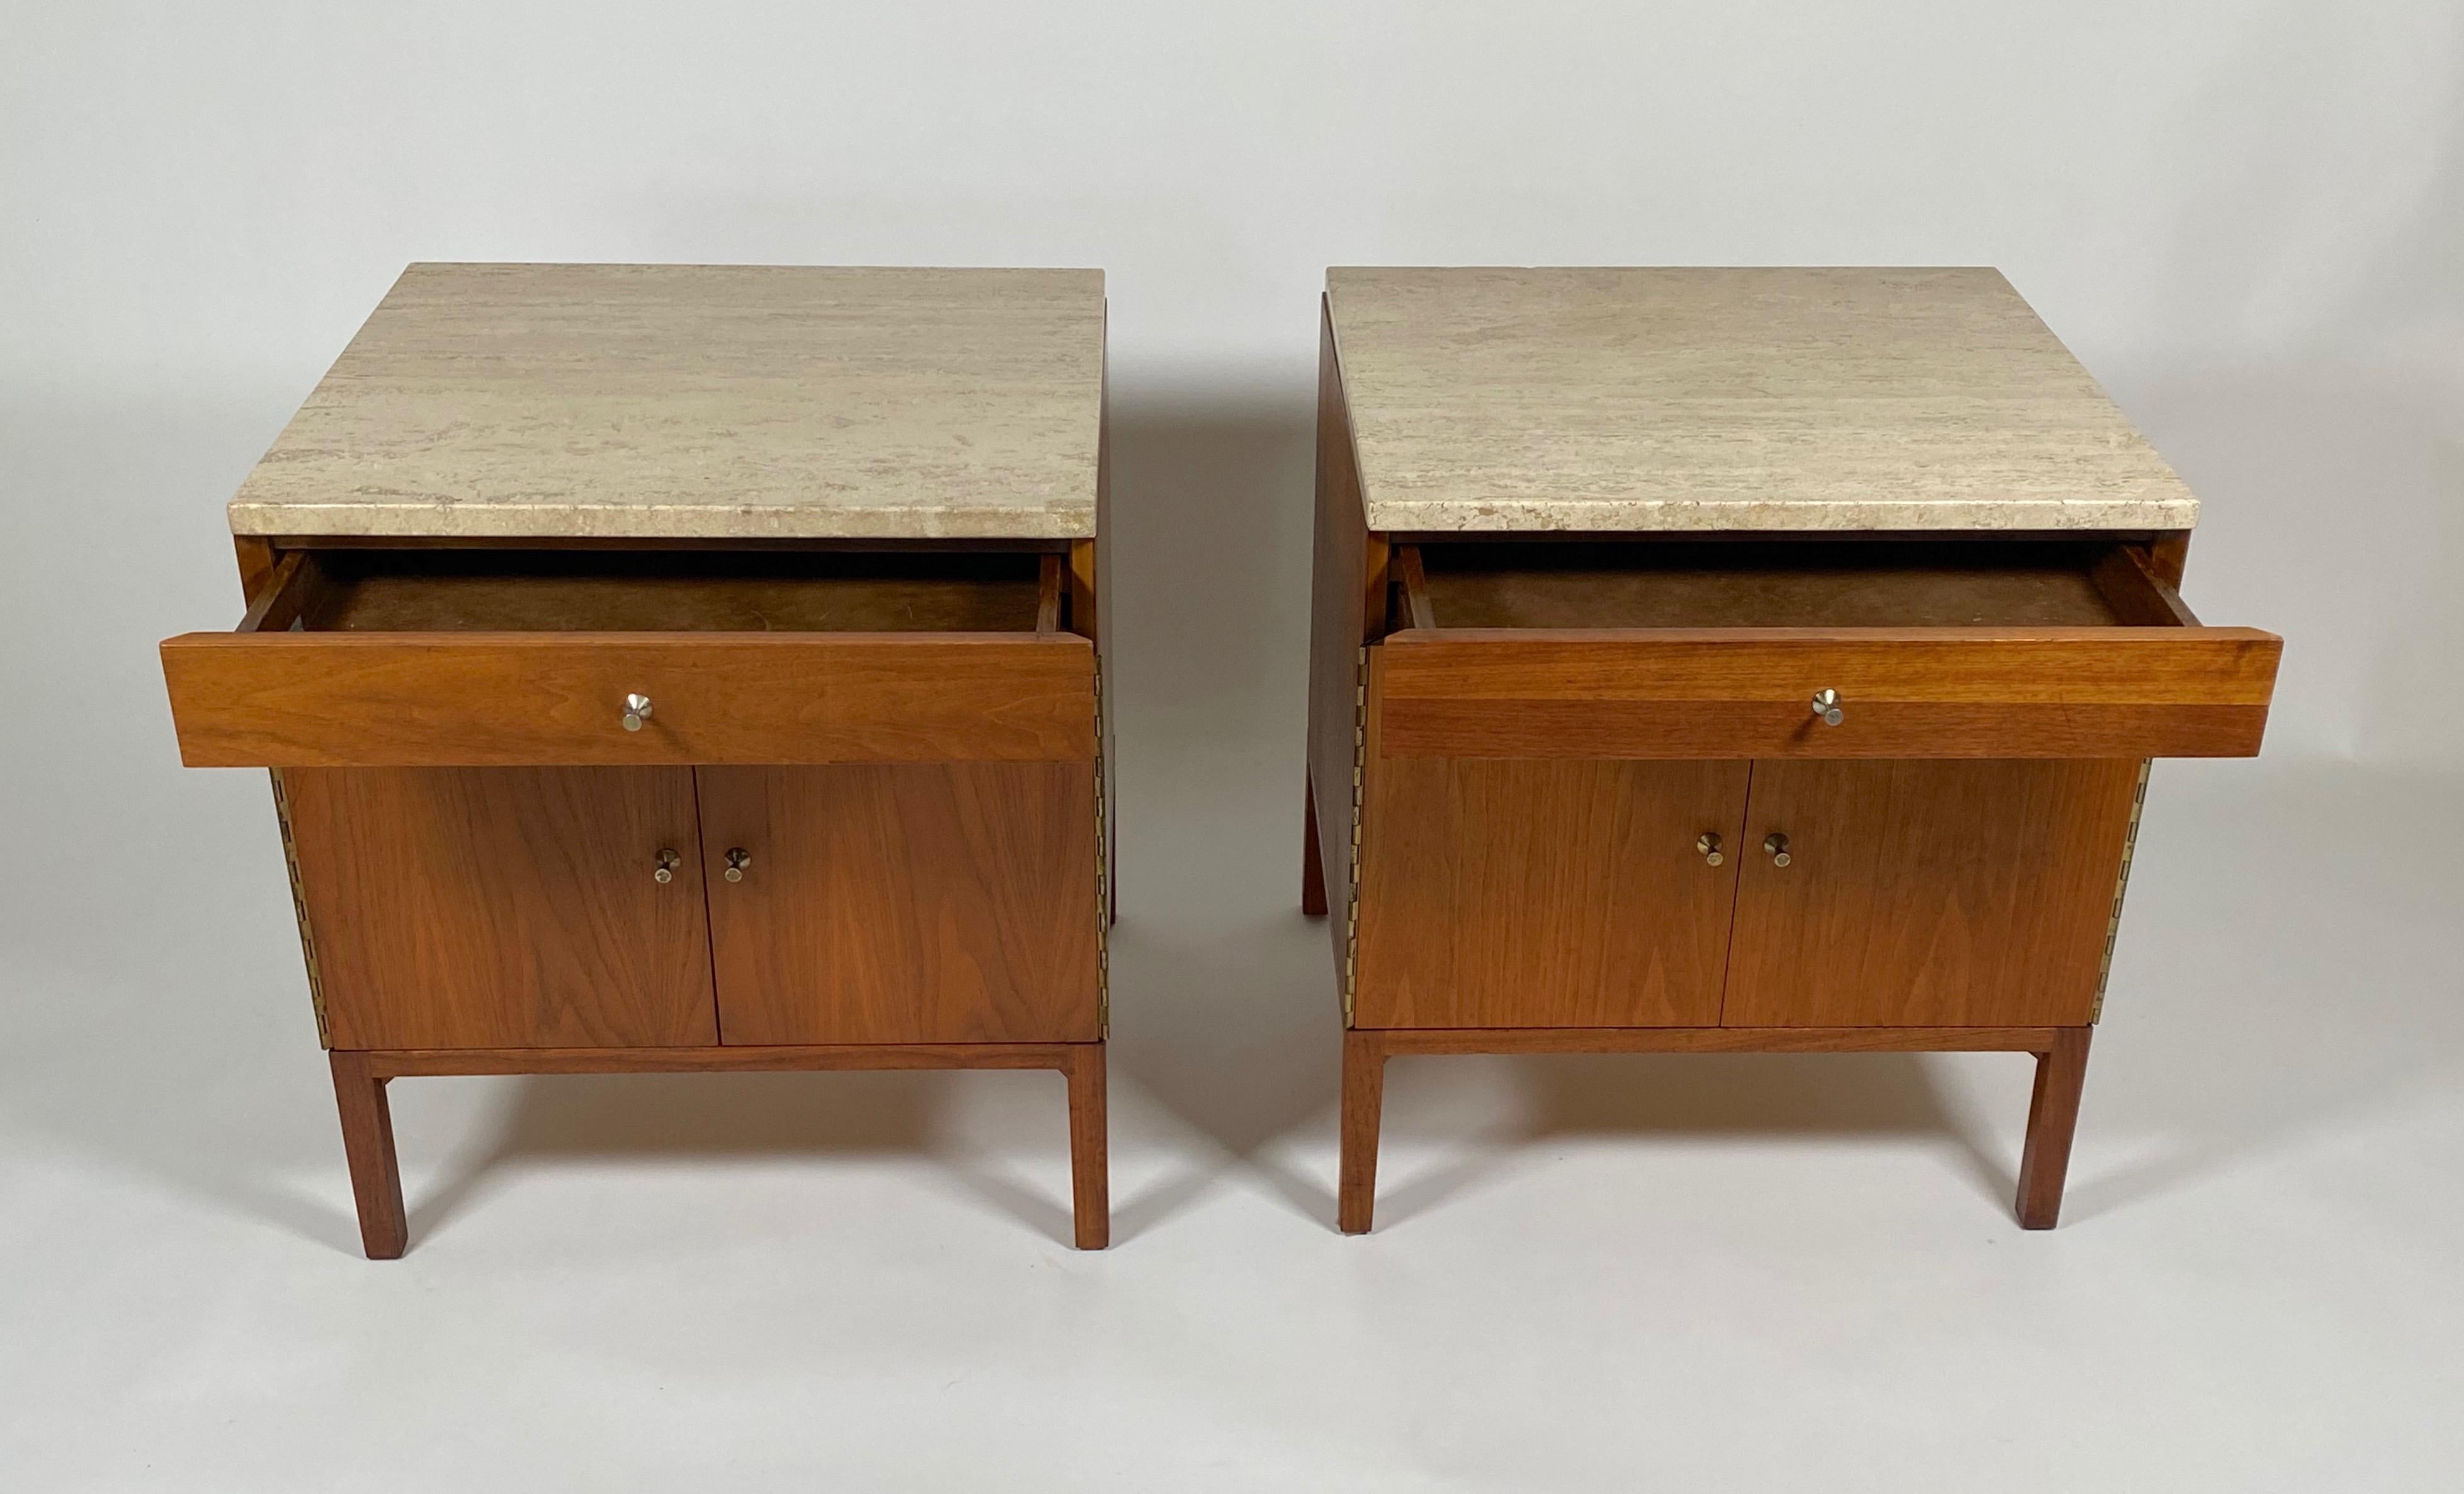 Hand-Crafted Paul McCobb for Calvin Nightstands in Walnut and Travertine